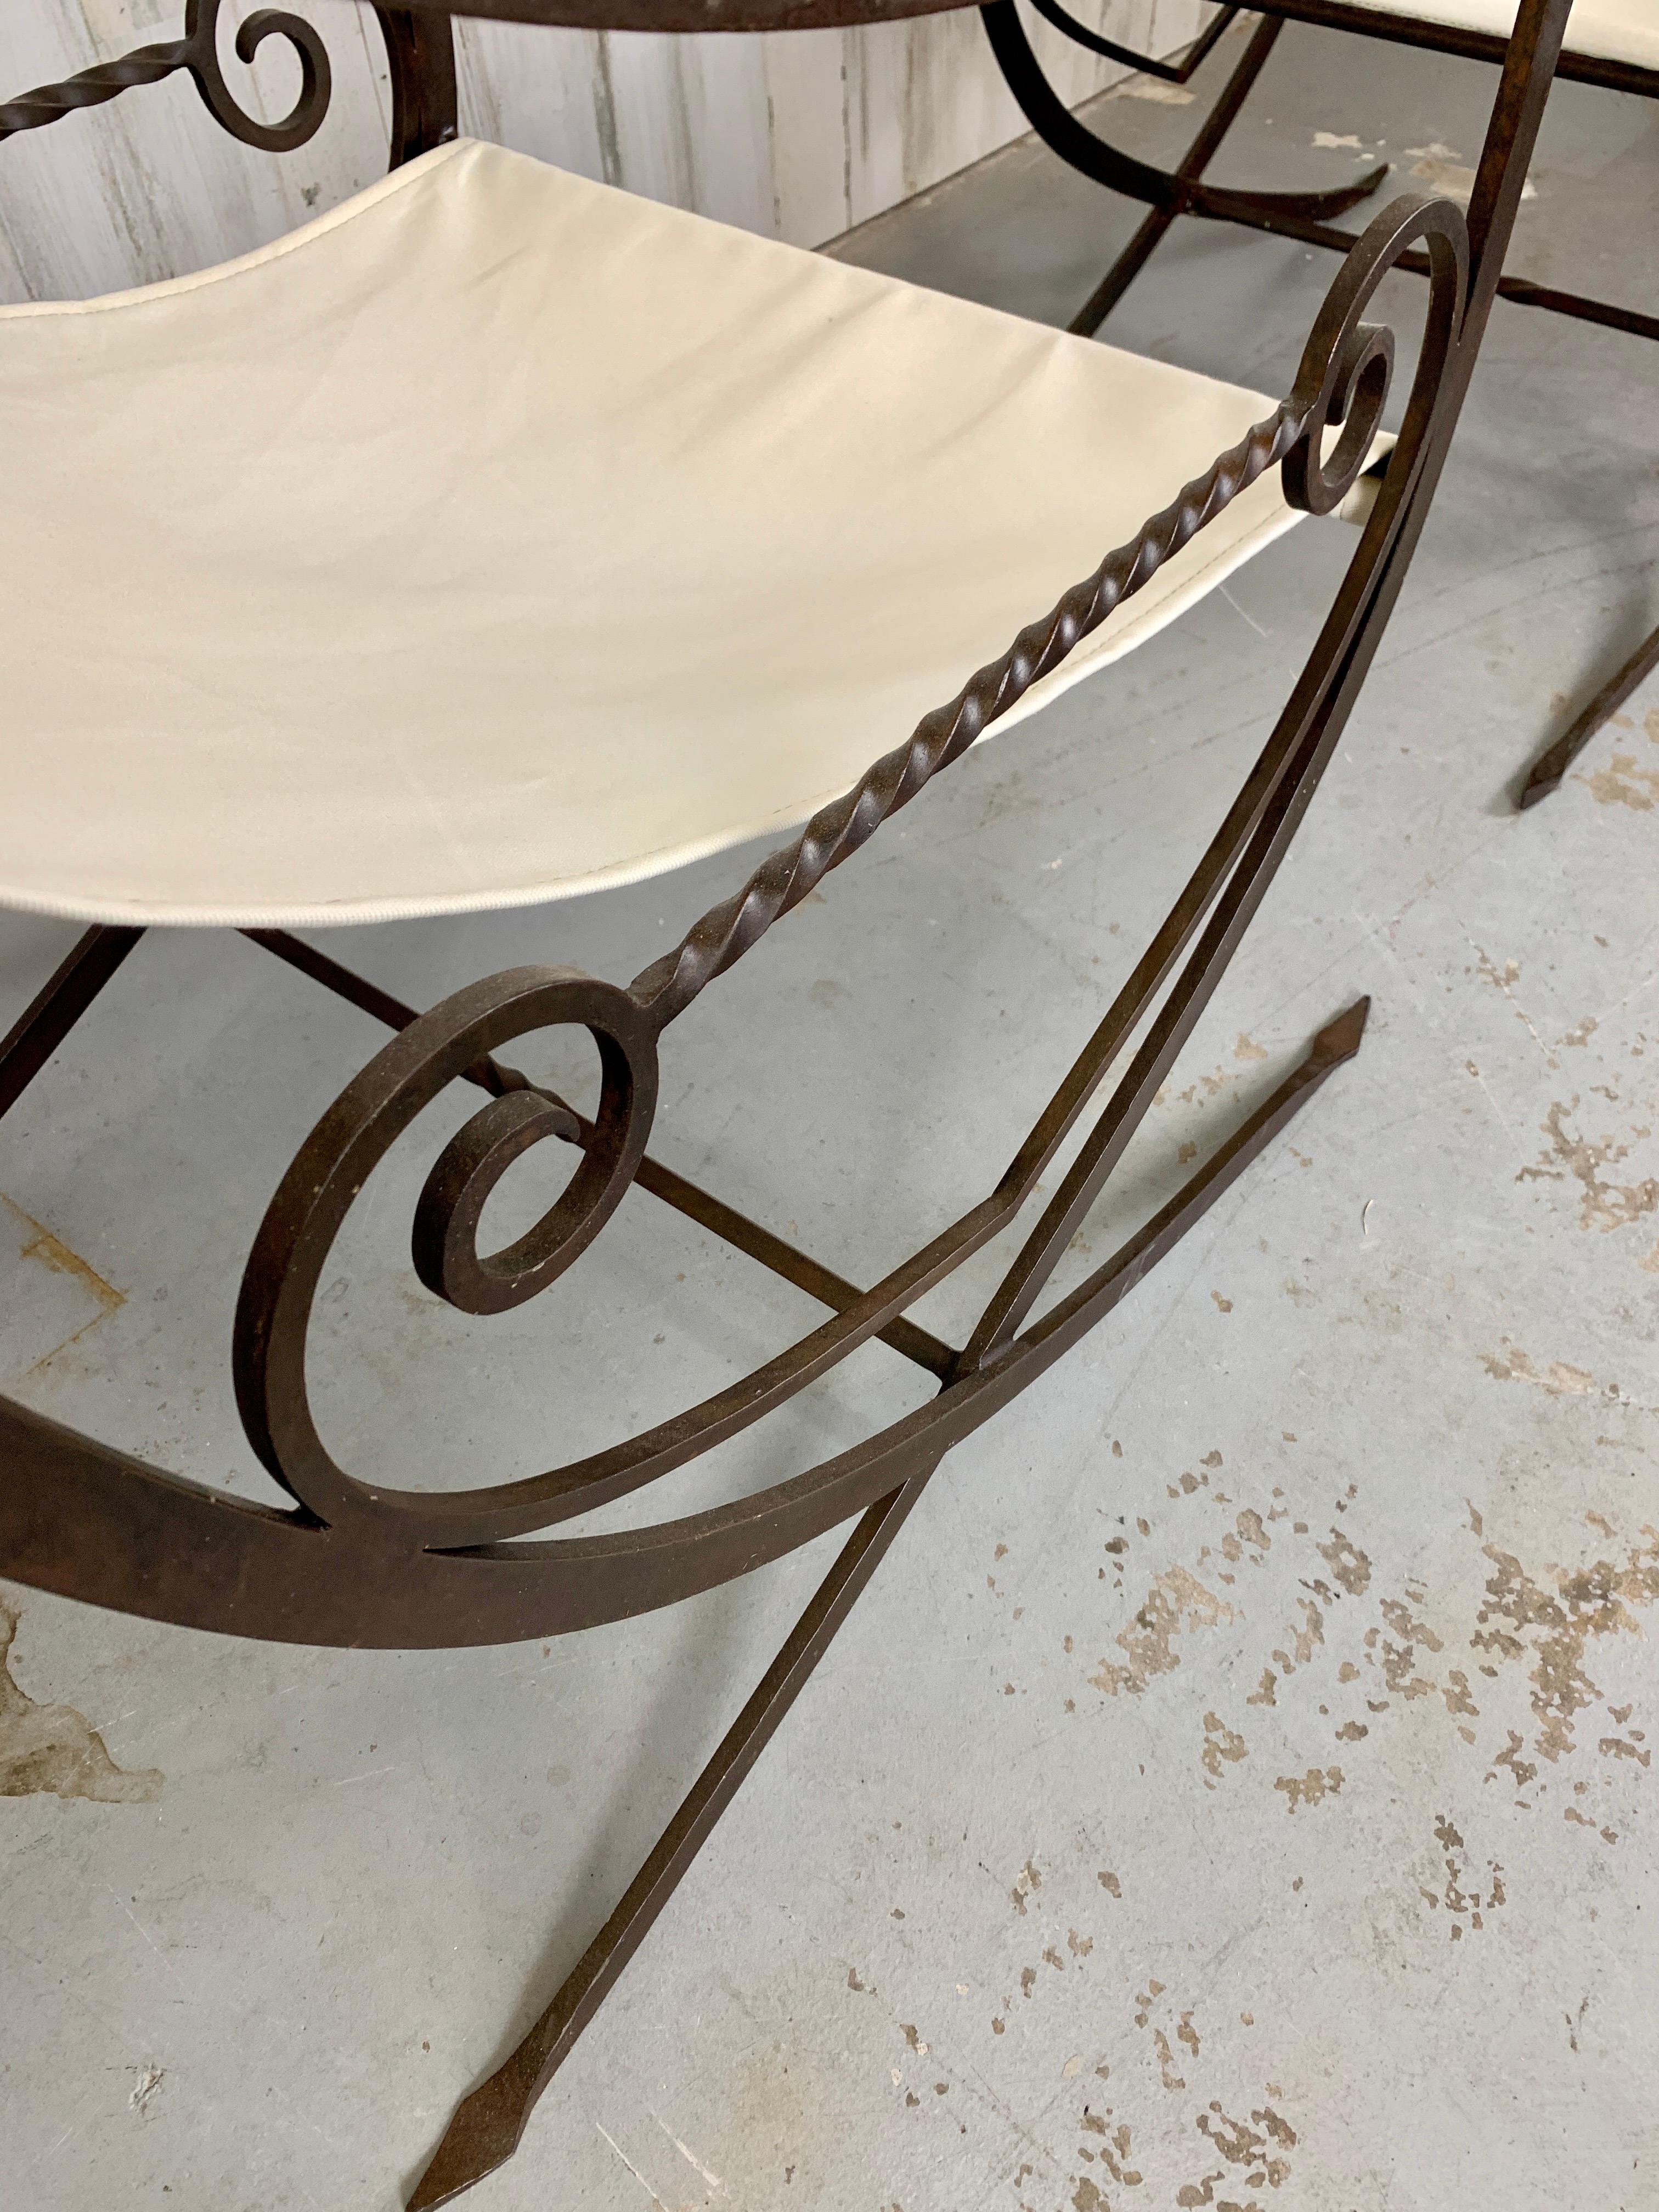 Sculpted Forged Iron Sling Chairs, 1940's For Sale 3